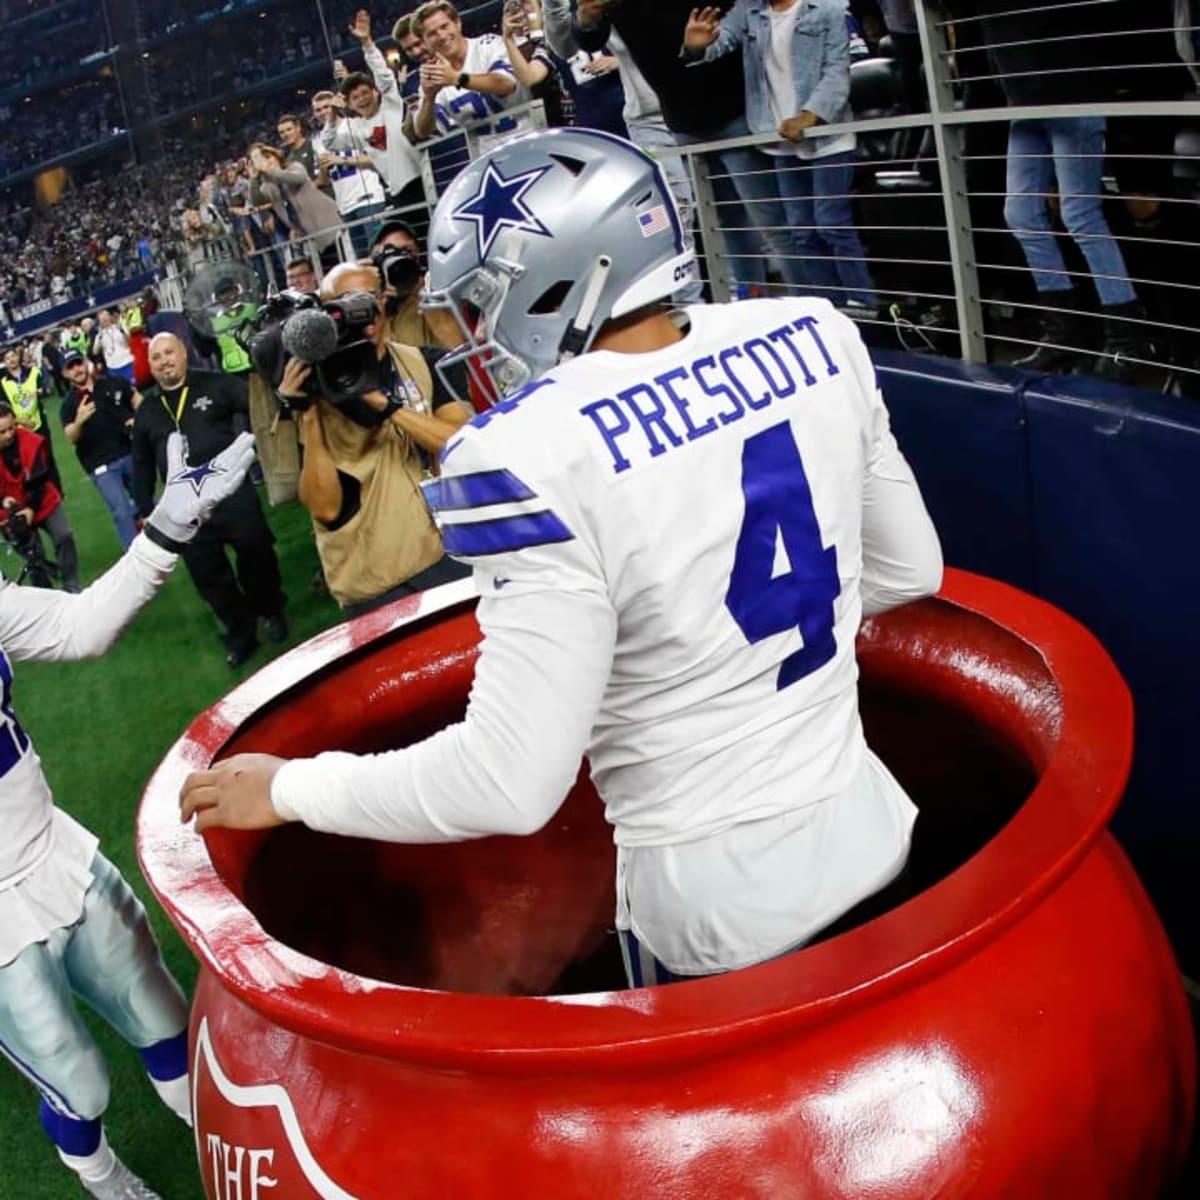 Cowboys find rhythm to beat Giants on Thanksgiving, gain ground in NFC East